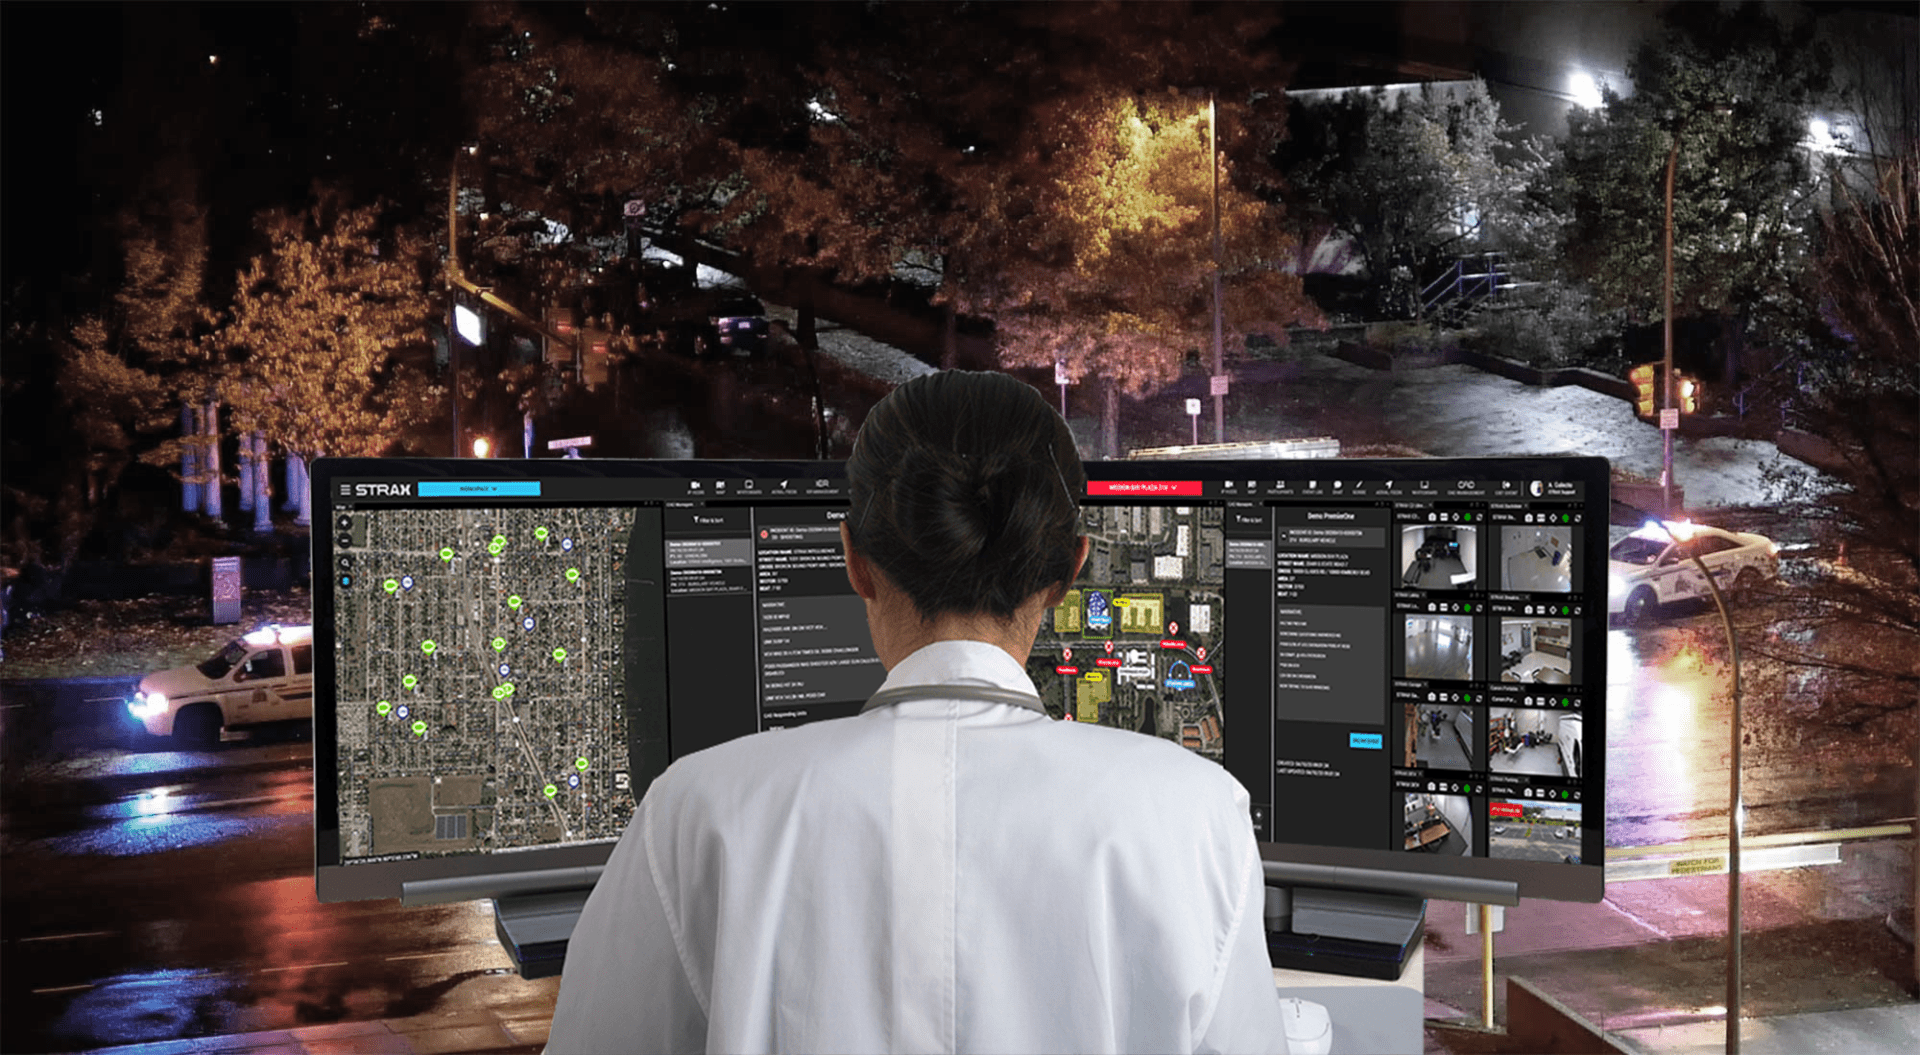 STRAX® Intelligence Group and Critical Response Group Join Together to Provide Improved Public Safety Solution